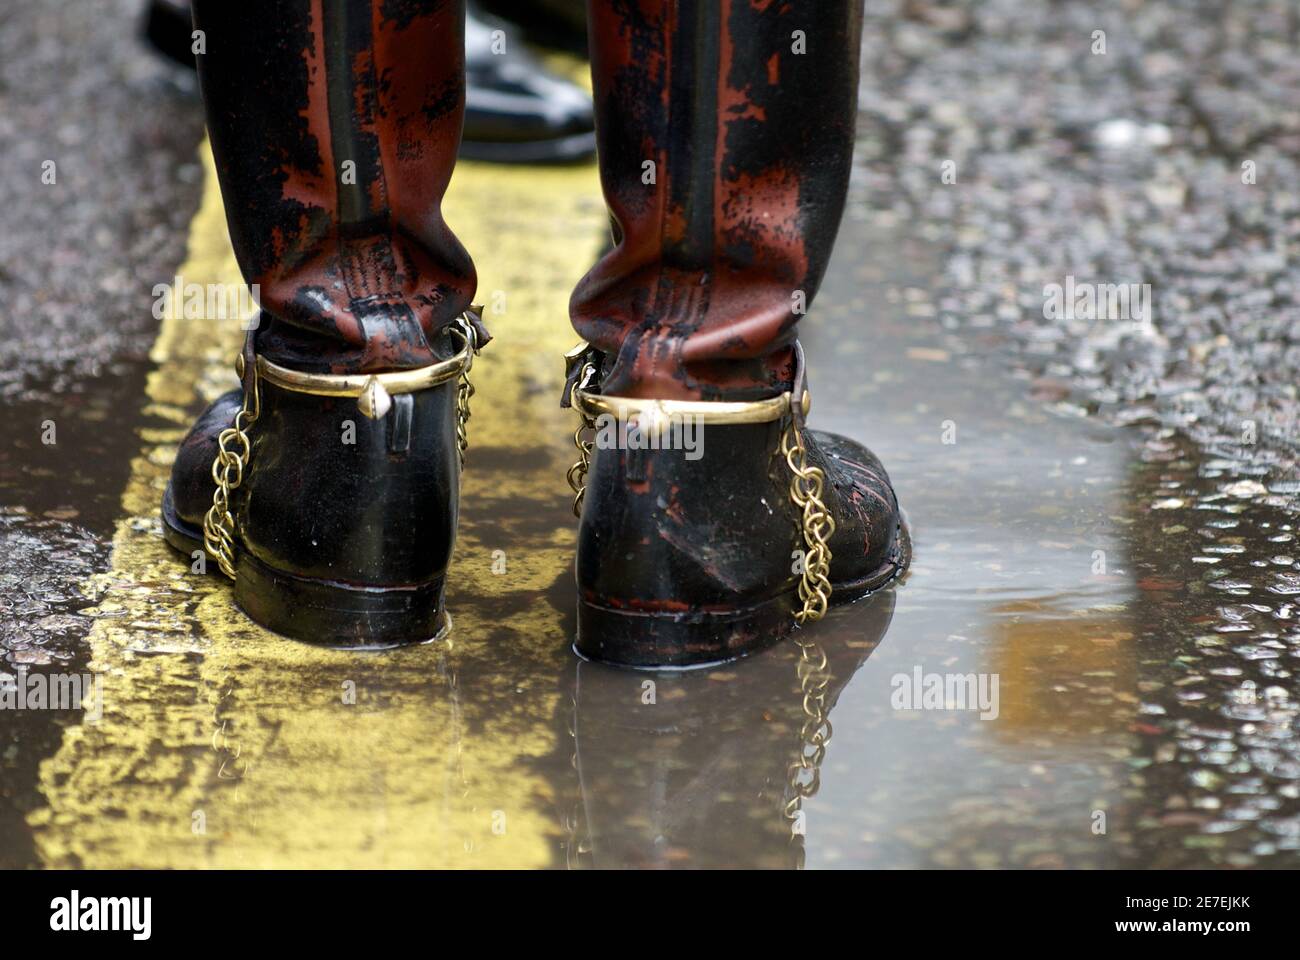 Boots of Bravery: Firefighter's Heroic Journey Captured During an Intense Operation Stock Photo